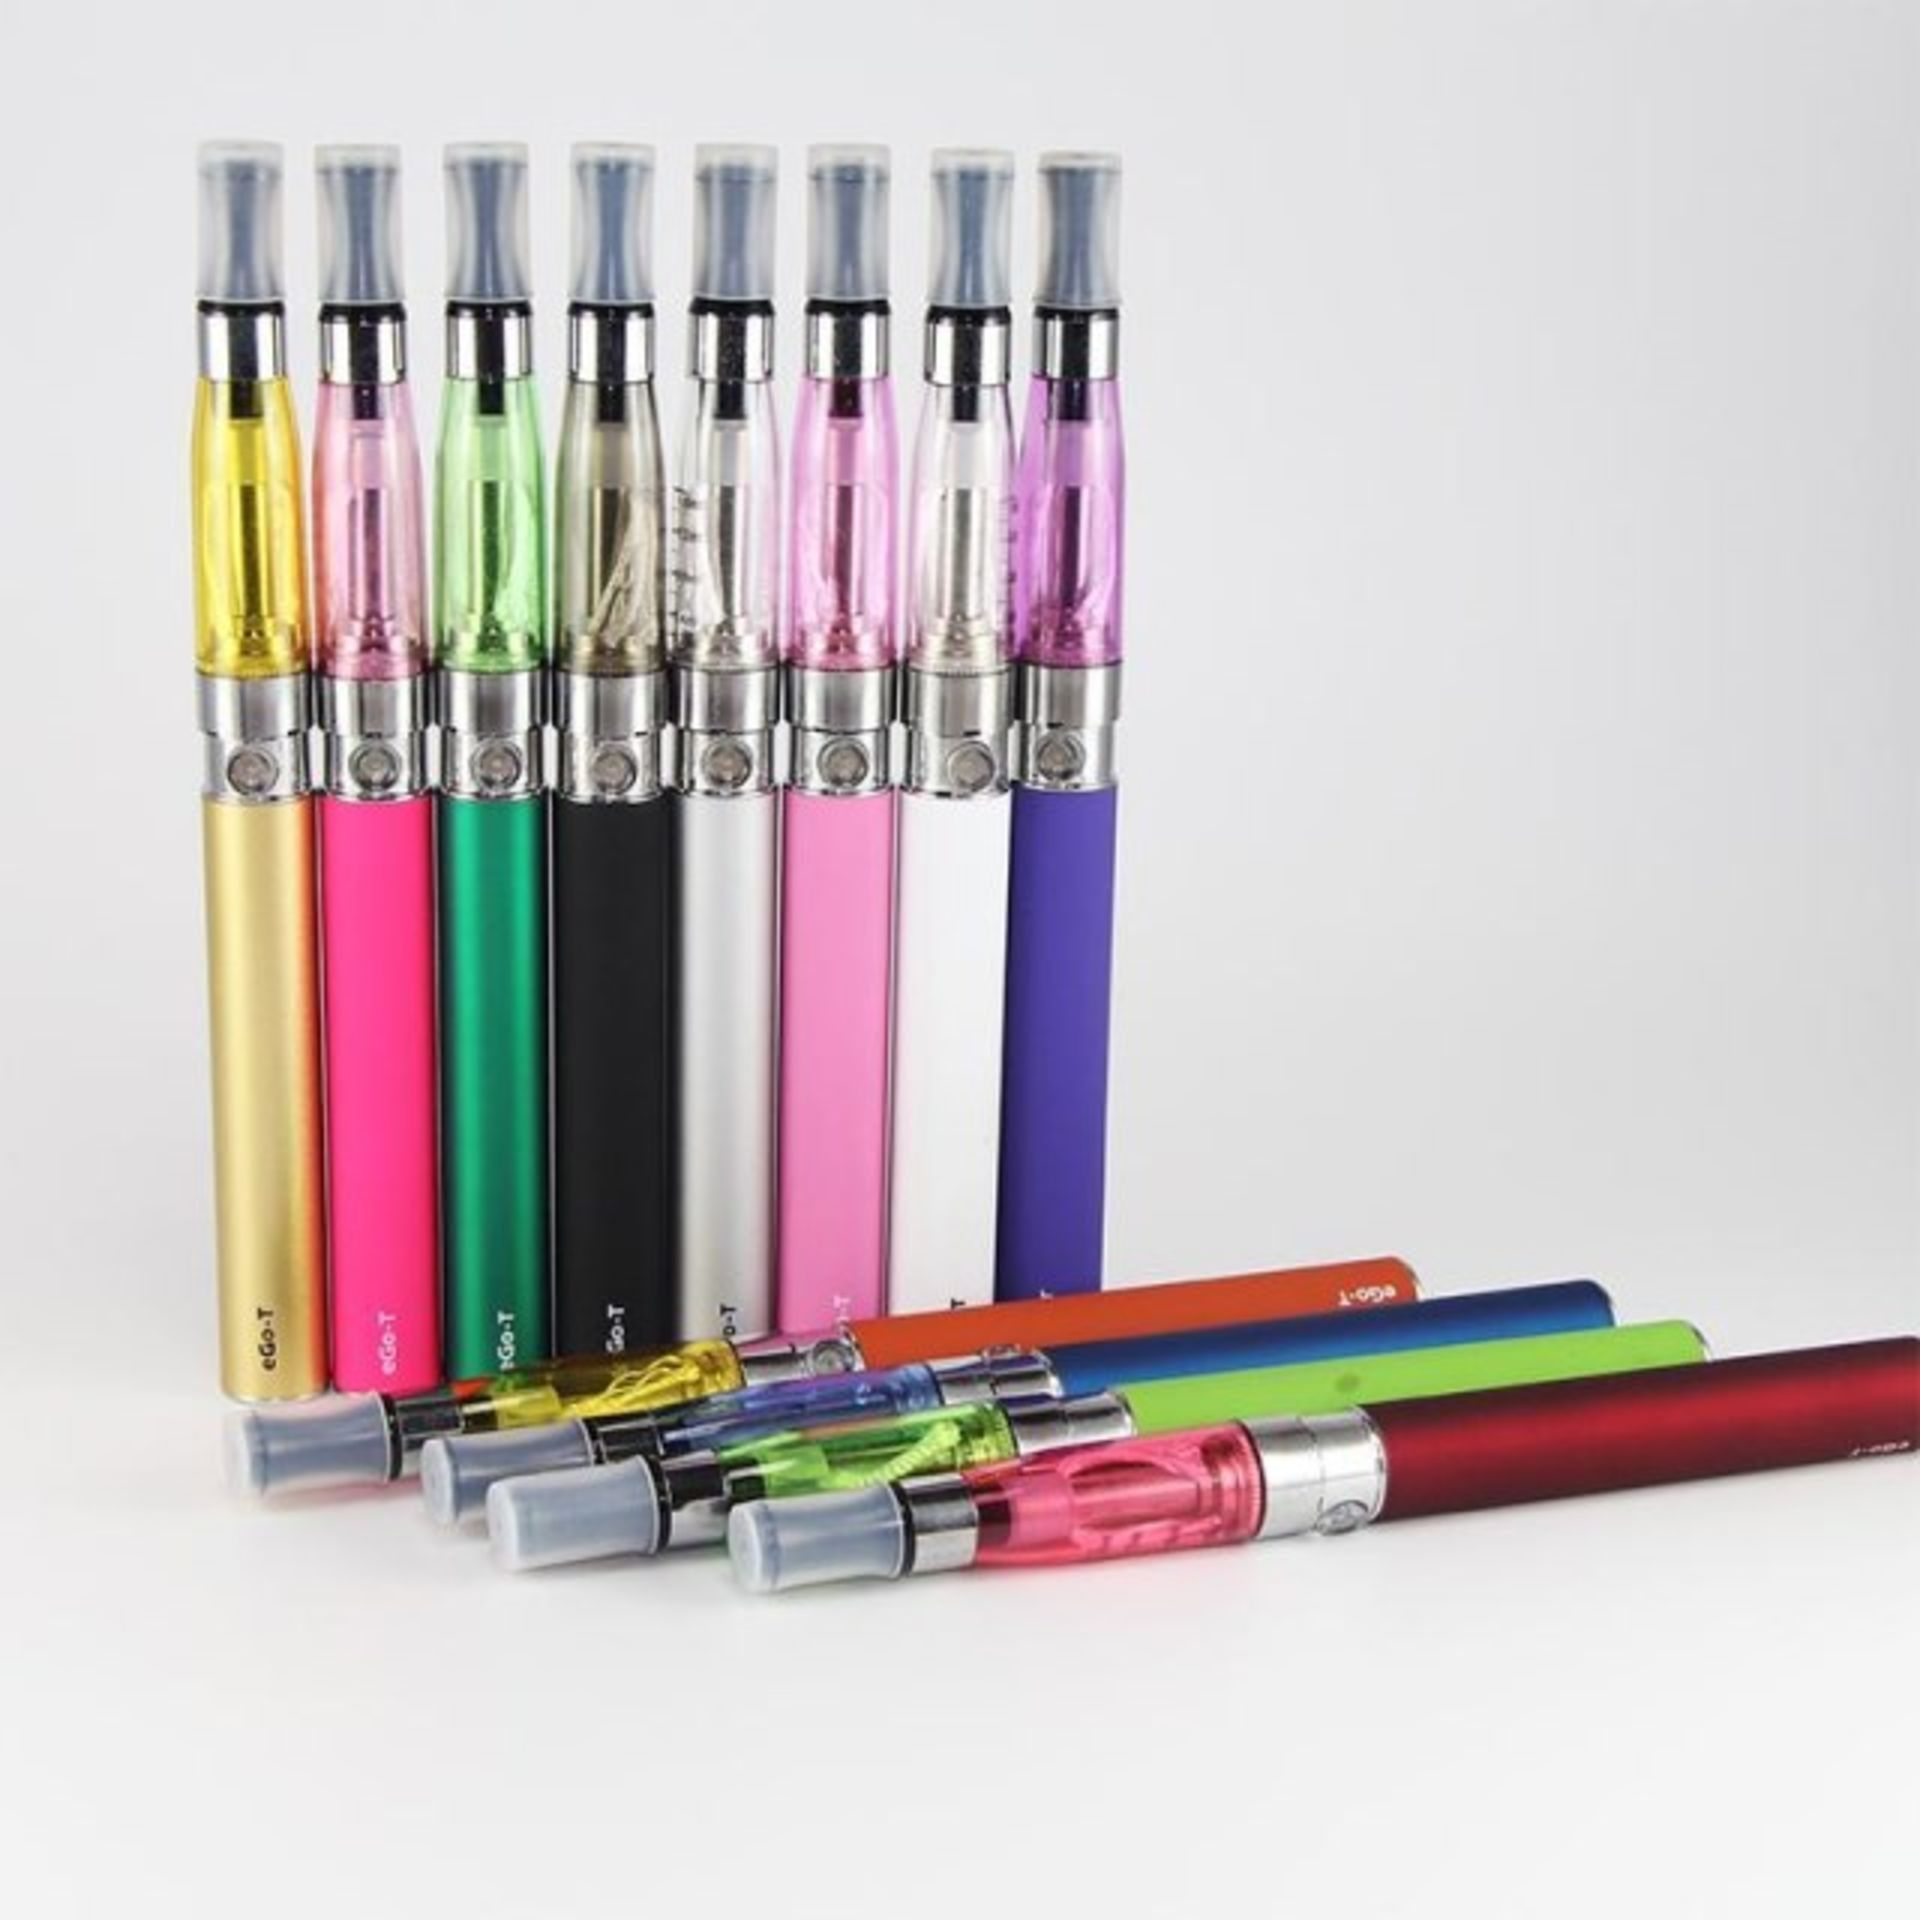 Brand New Electronic Cigarette Kit With Battery And USB Charger (Colours May Vary) X 2 YOUR BID